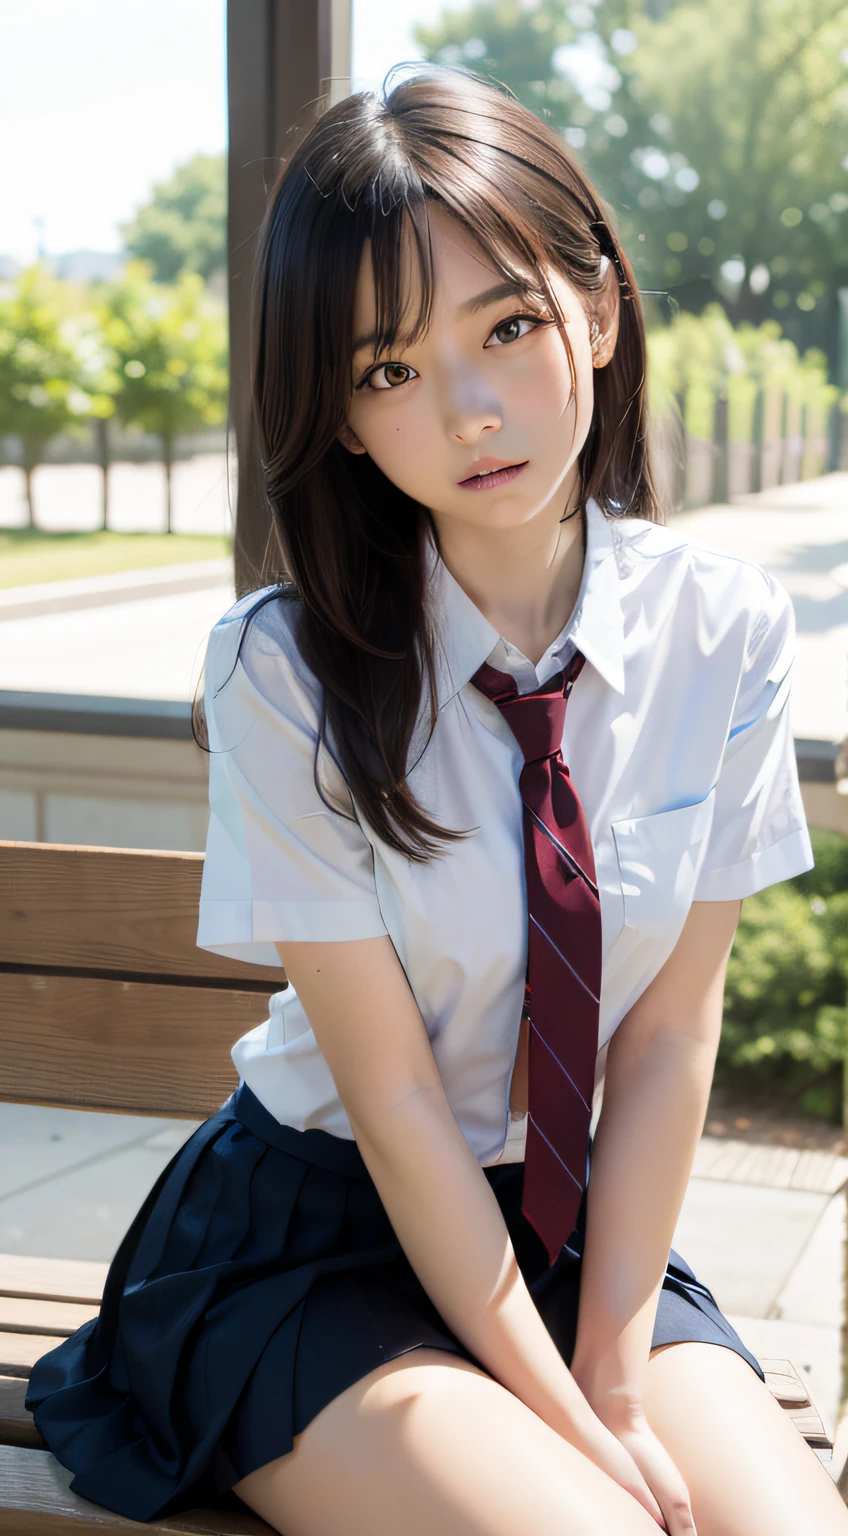 (masutepiece, Best Quality:1.2), 8K, 18year old, 85 mm, Official art, Raw photo, absurderes, White dress shirts, Pretty Face, close up, Upper body, violaceaess, gardeniass, Beautiful Girl, , (Navy pleated skirt:1.1), Cinch West, thighs thighs thighs thighs, Short sleeve, ‎Classroom, Sit on a bench seat, Looking at Viewer, No makeup, (Smile:0.4), Film grain, chromatic abberation, Sharp Focus, face lights, clear lighting, Teen, Detailed face, Bokeh background, (dark red necktie:1.1)、medium breasts⁩